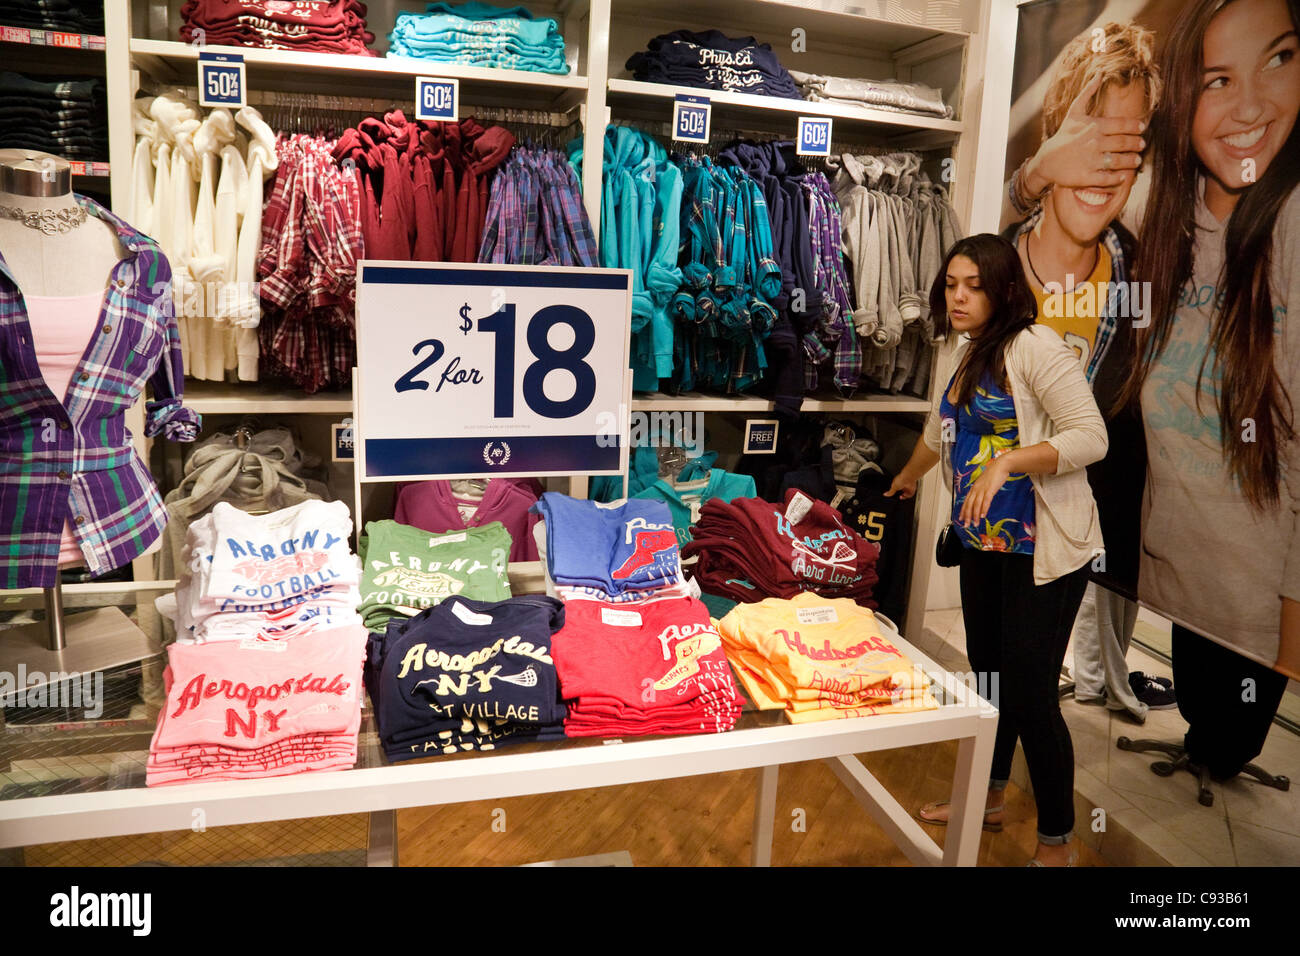 A teenage girl shopping for clothes, Aeropostale clothes store